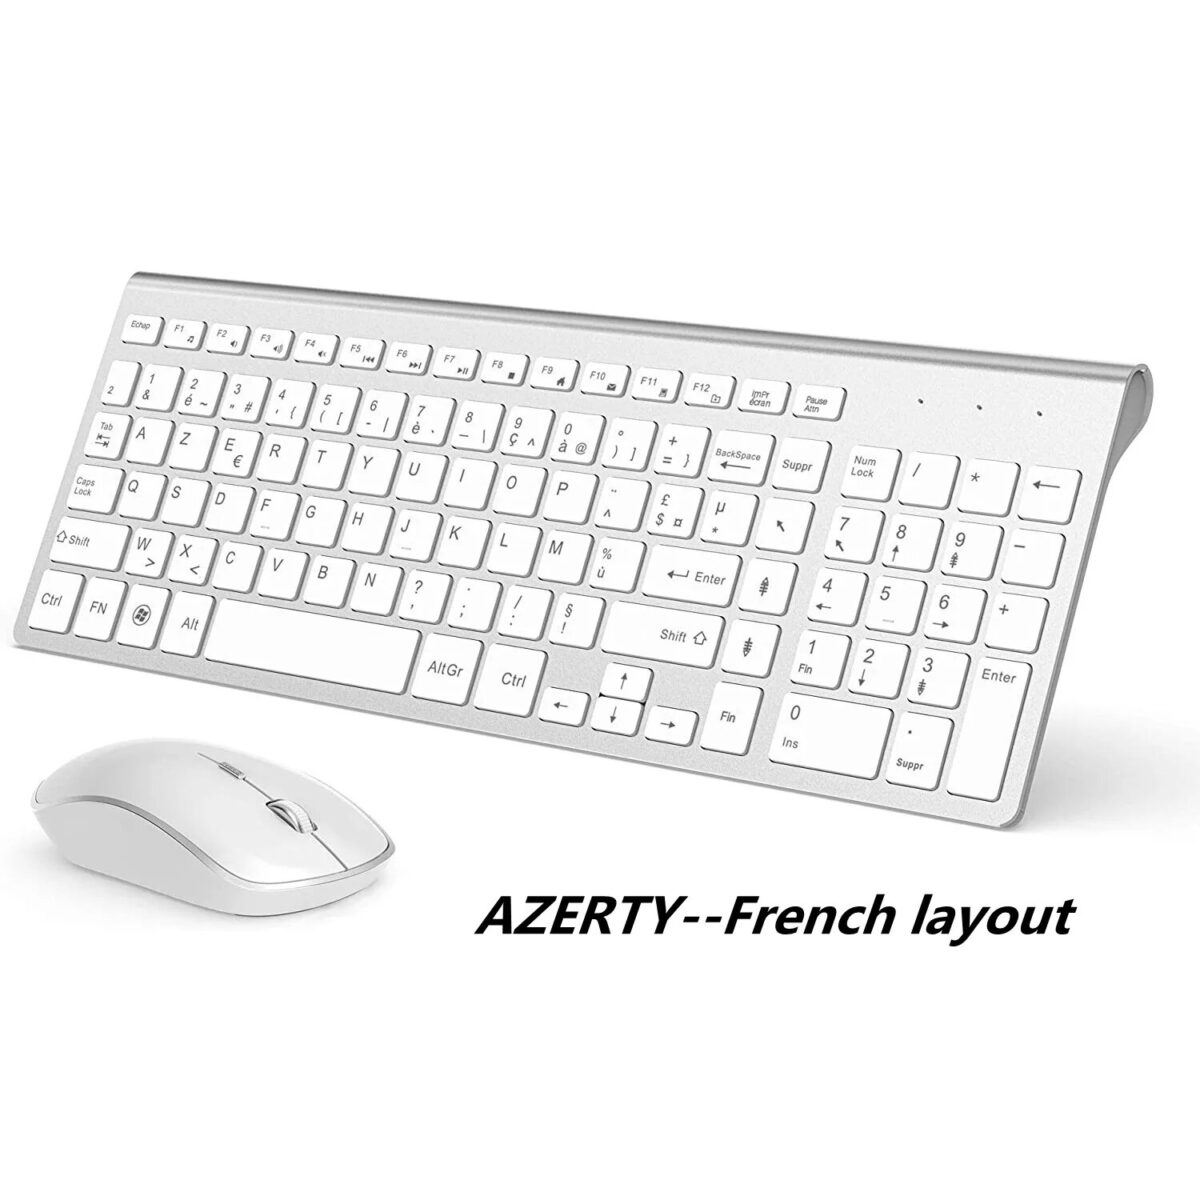 AZERTY French 2 4G Wireless Keyboard Mouse Ergonomic Compatible with IMac Mac PC Laptop Tablet Computer French 2.4G Wireless Keyboard Mouse Compatible with iMac PC Laptop Tablet Computer Windows (Silver White)